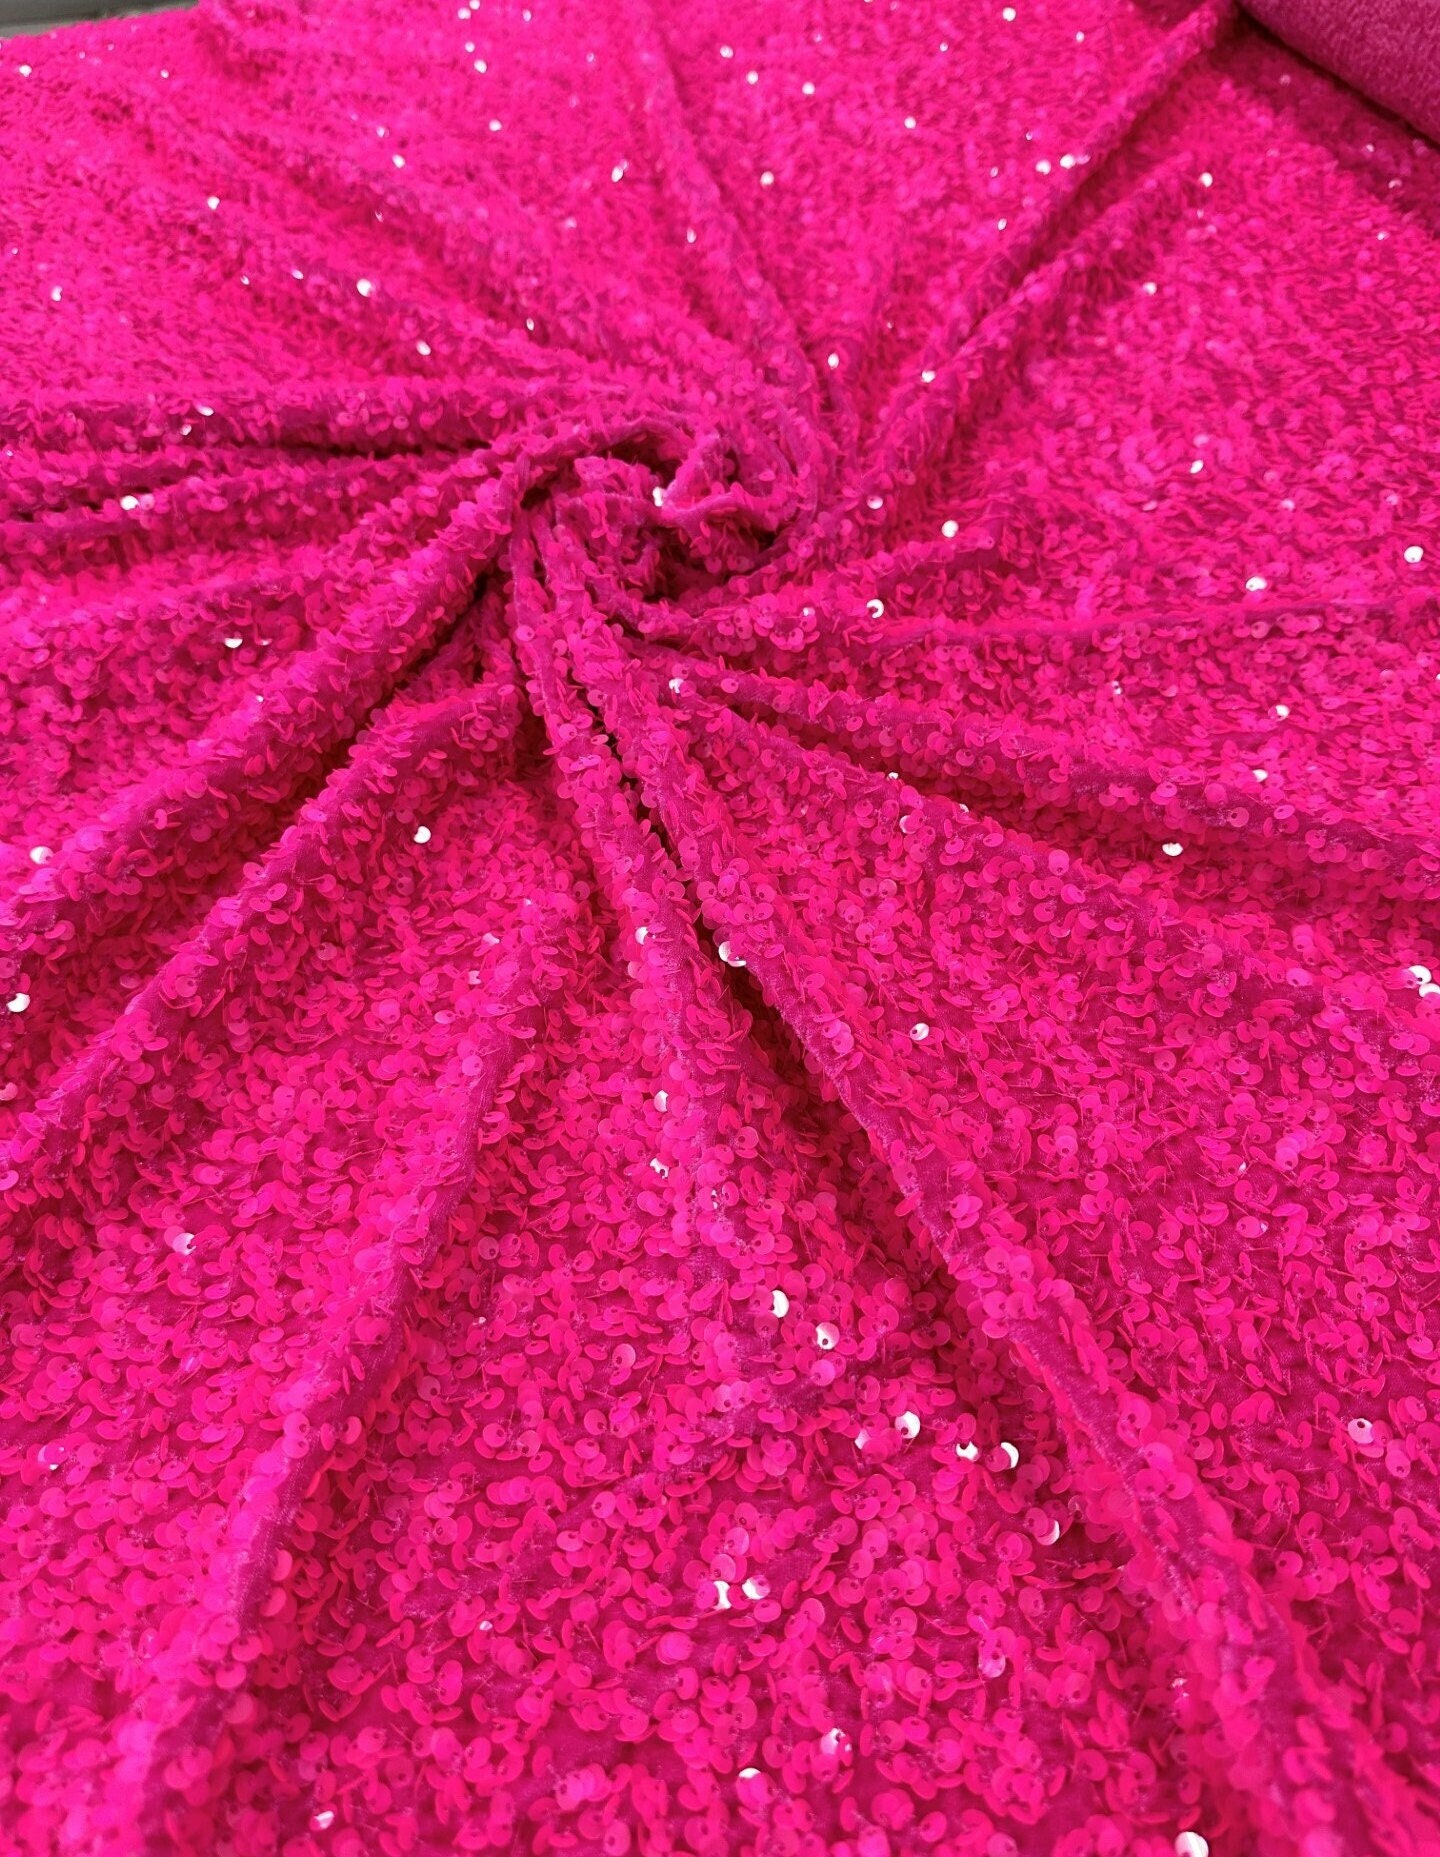 Hot Pink Neon Knit Fabric by the Yard Hot Pink Neon Solid Techno